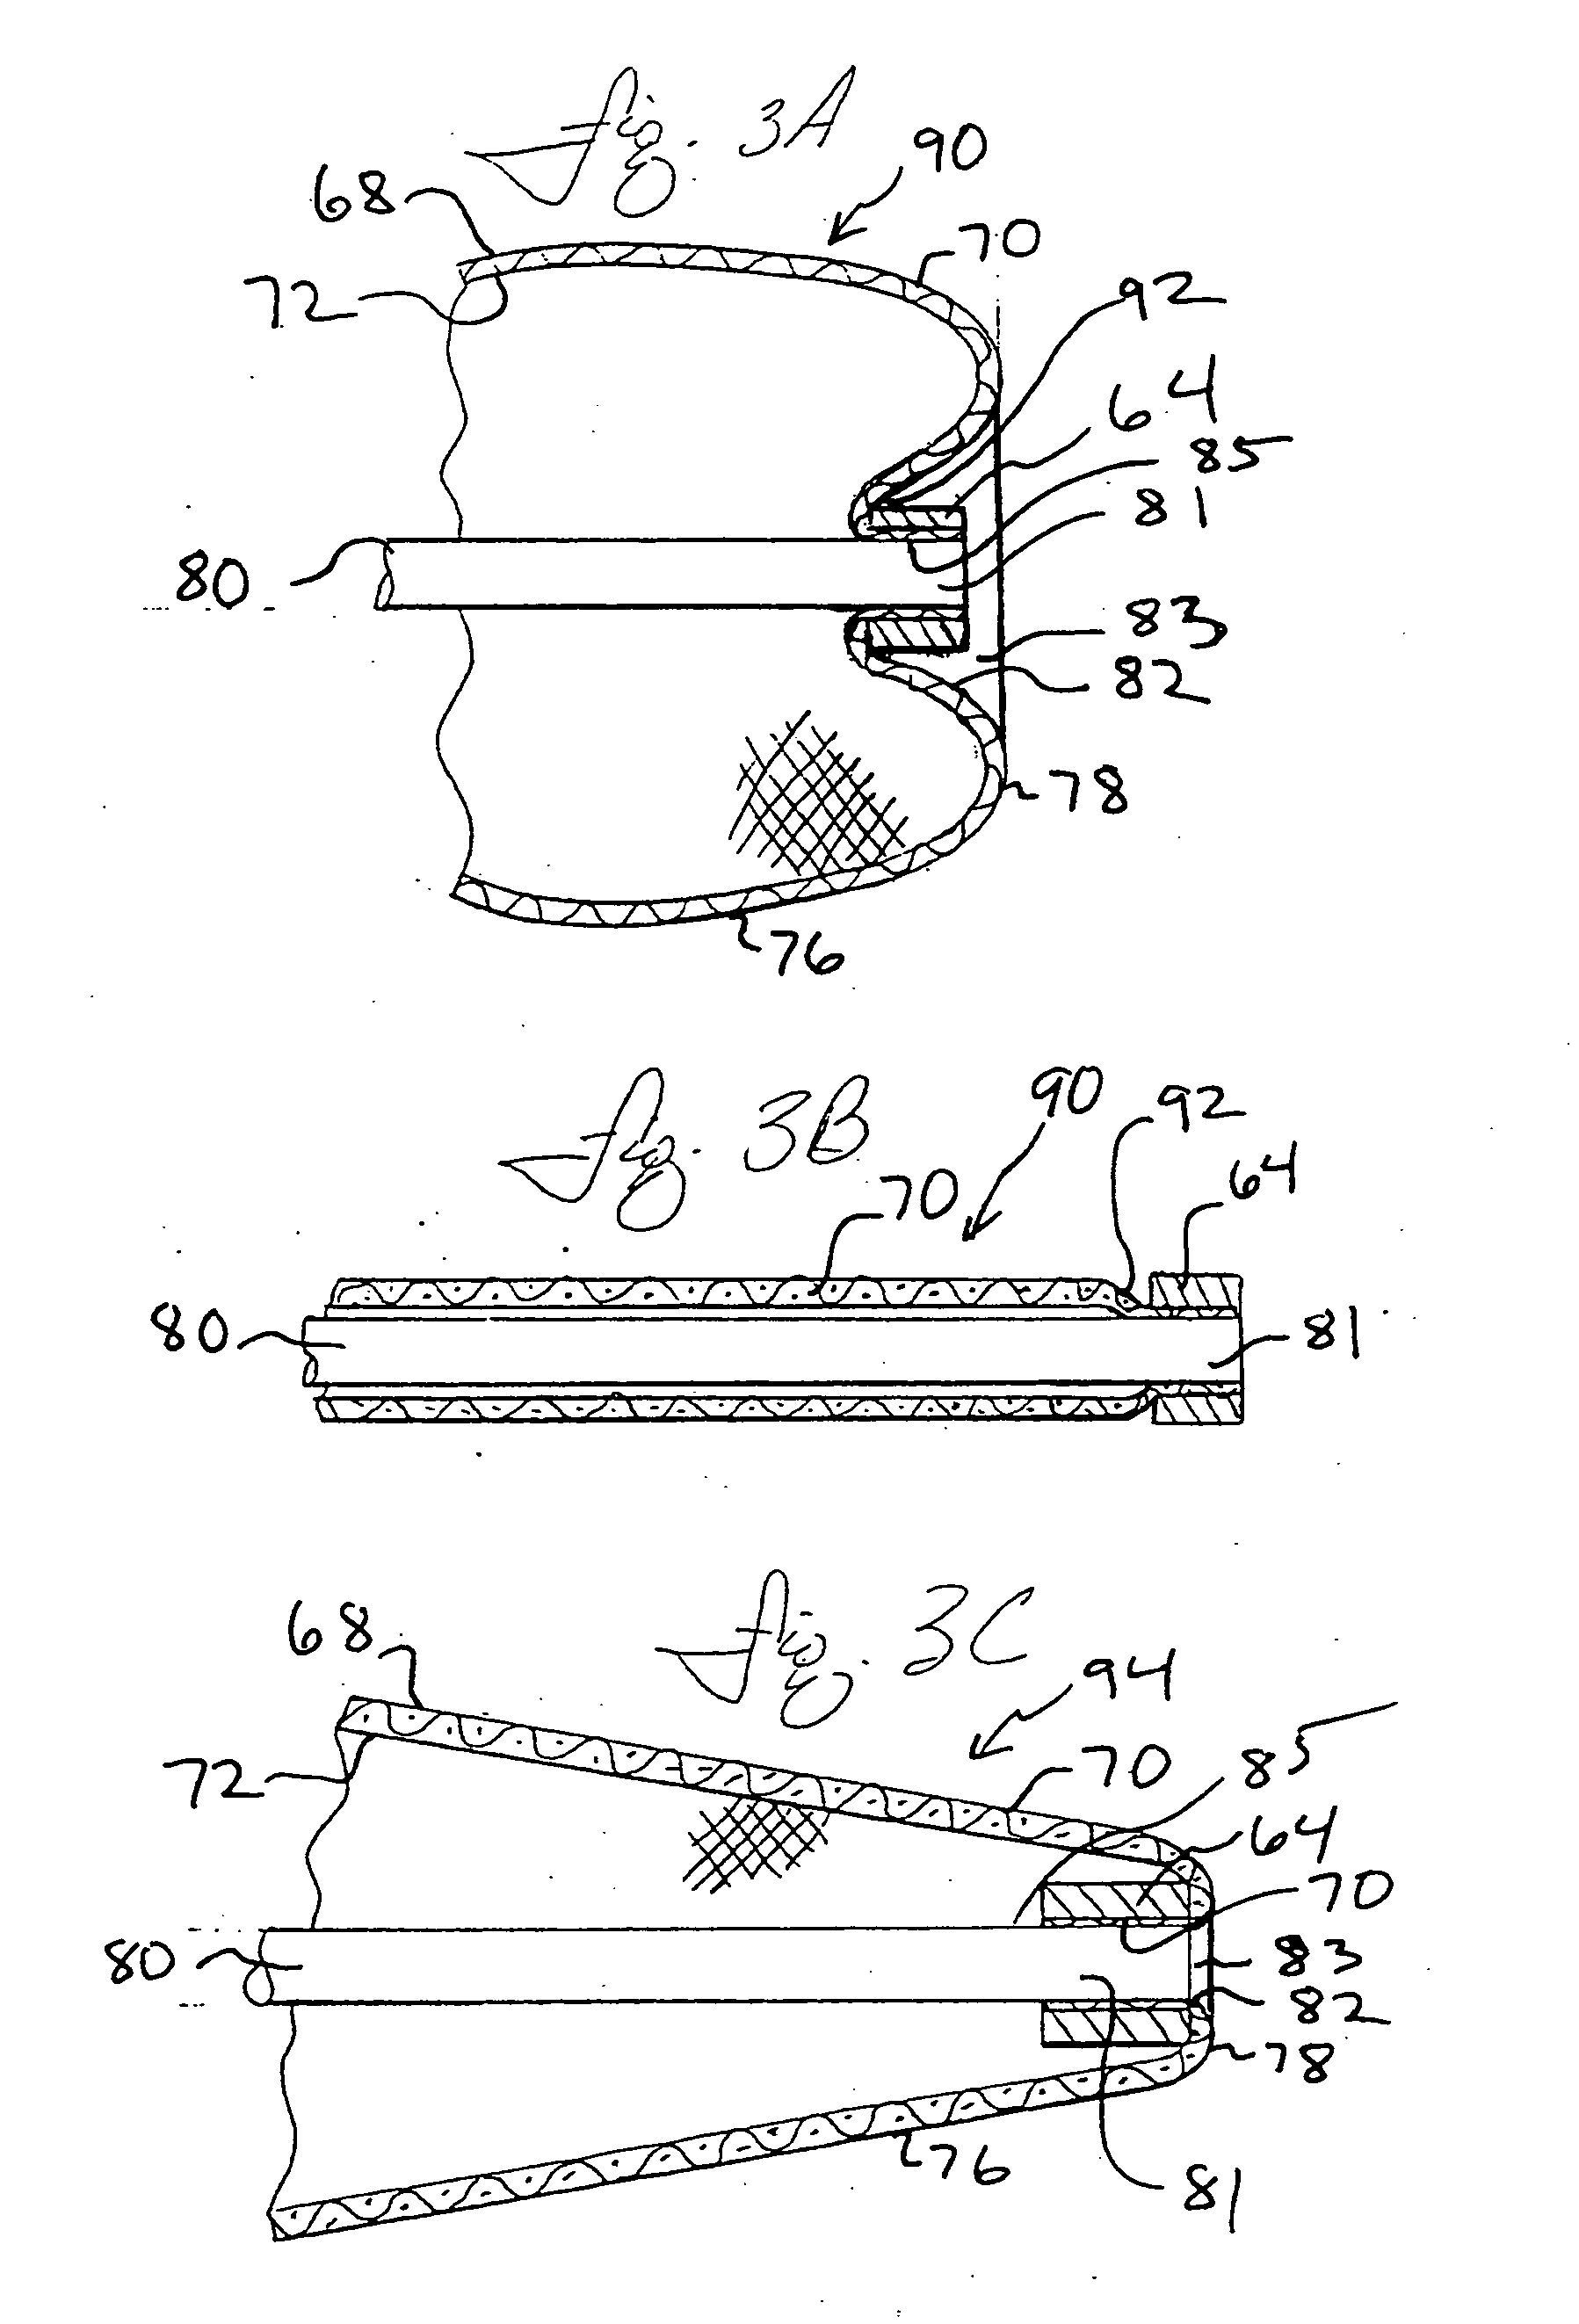 Everted filter device